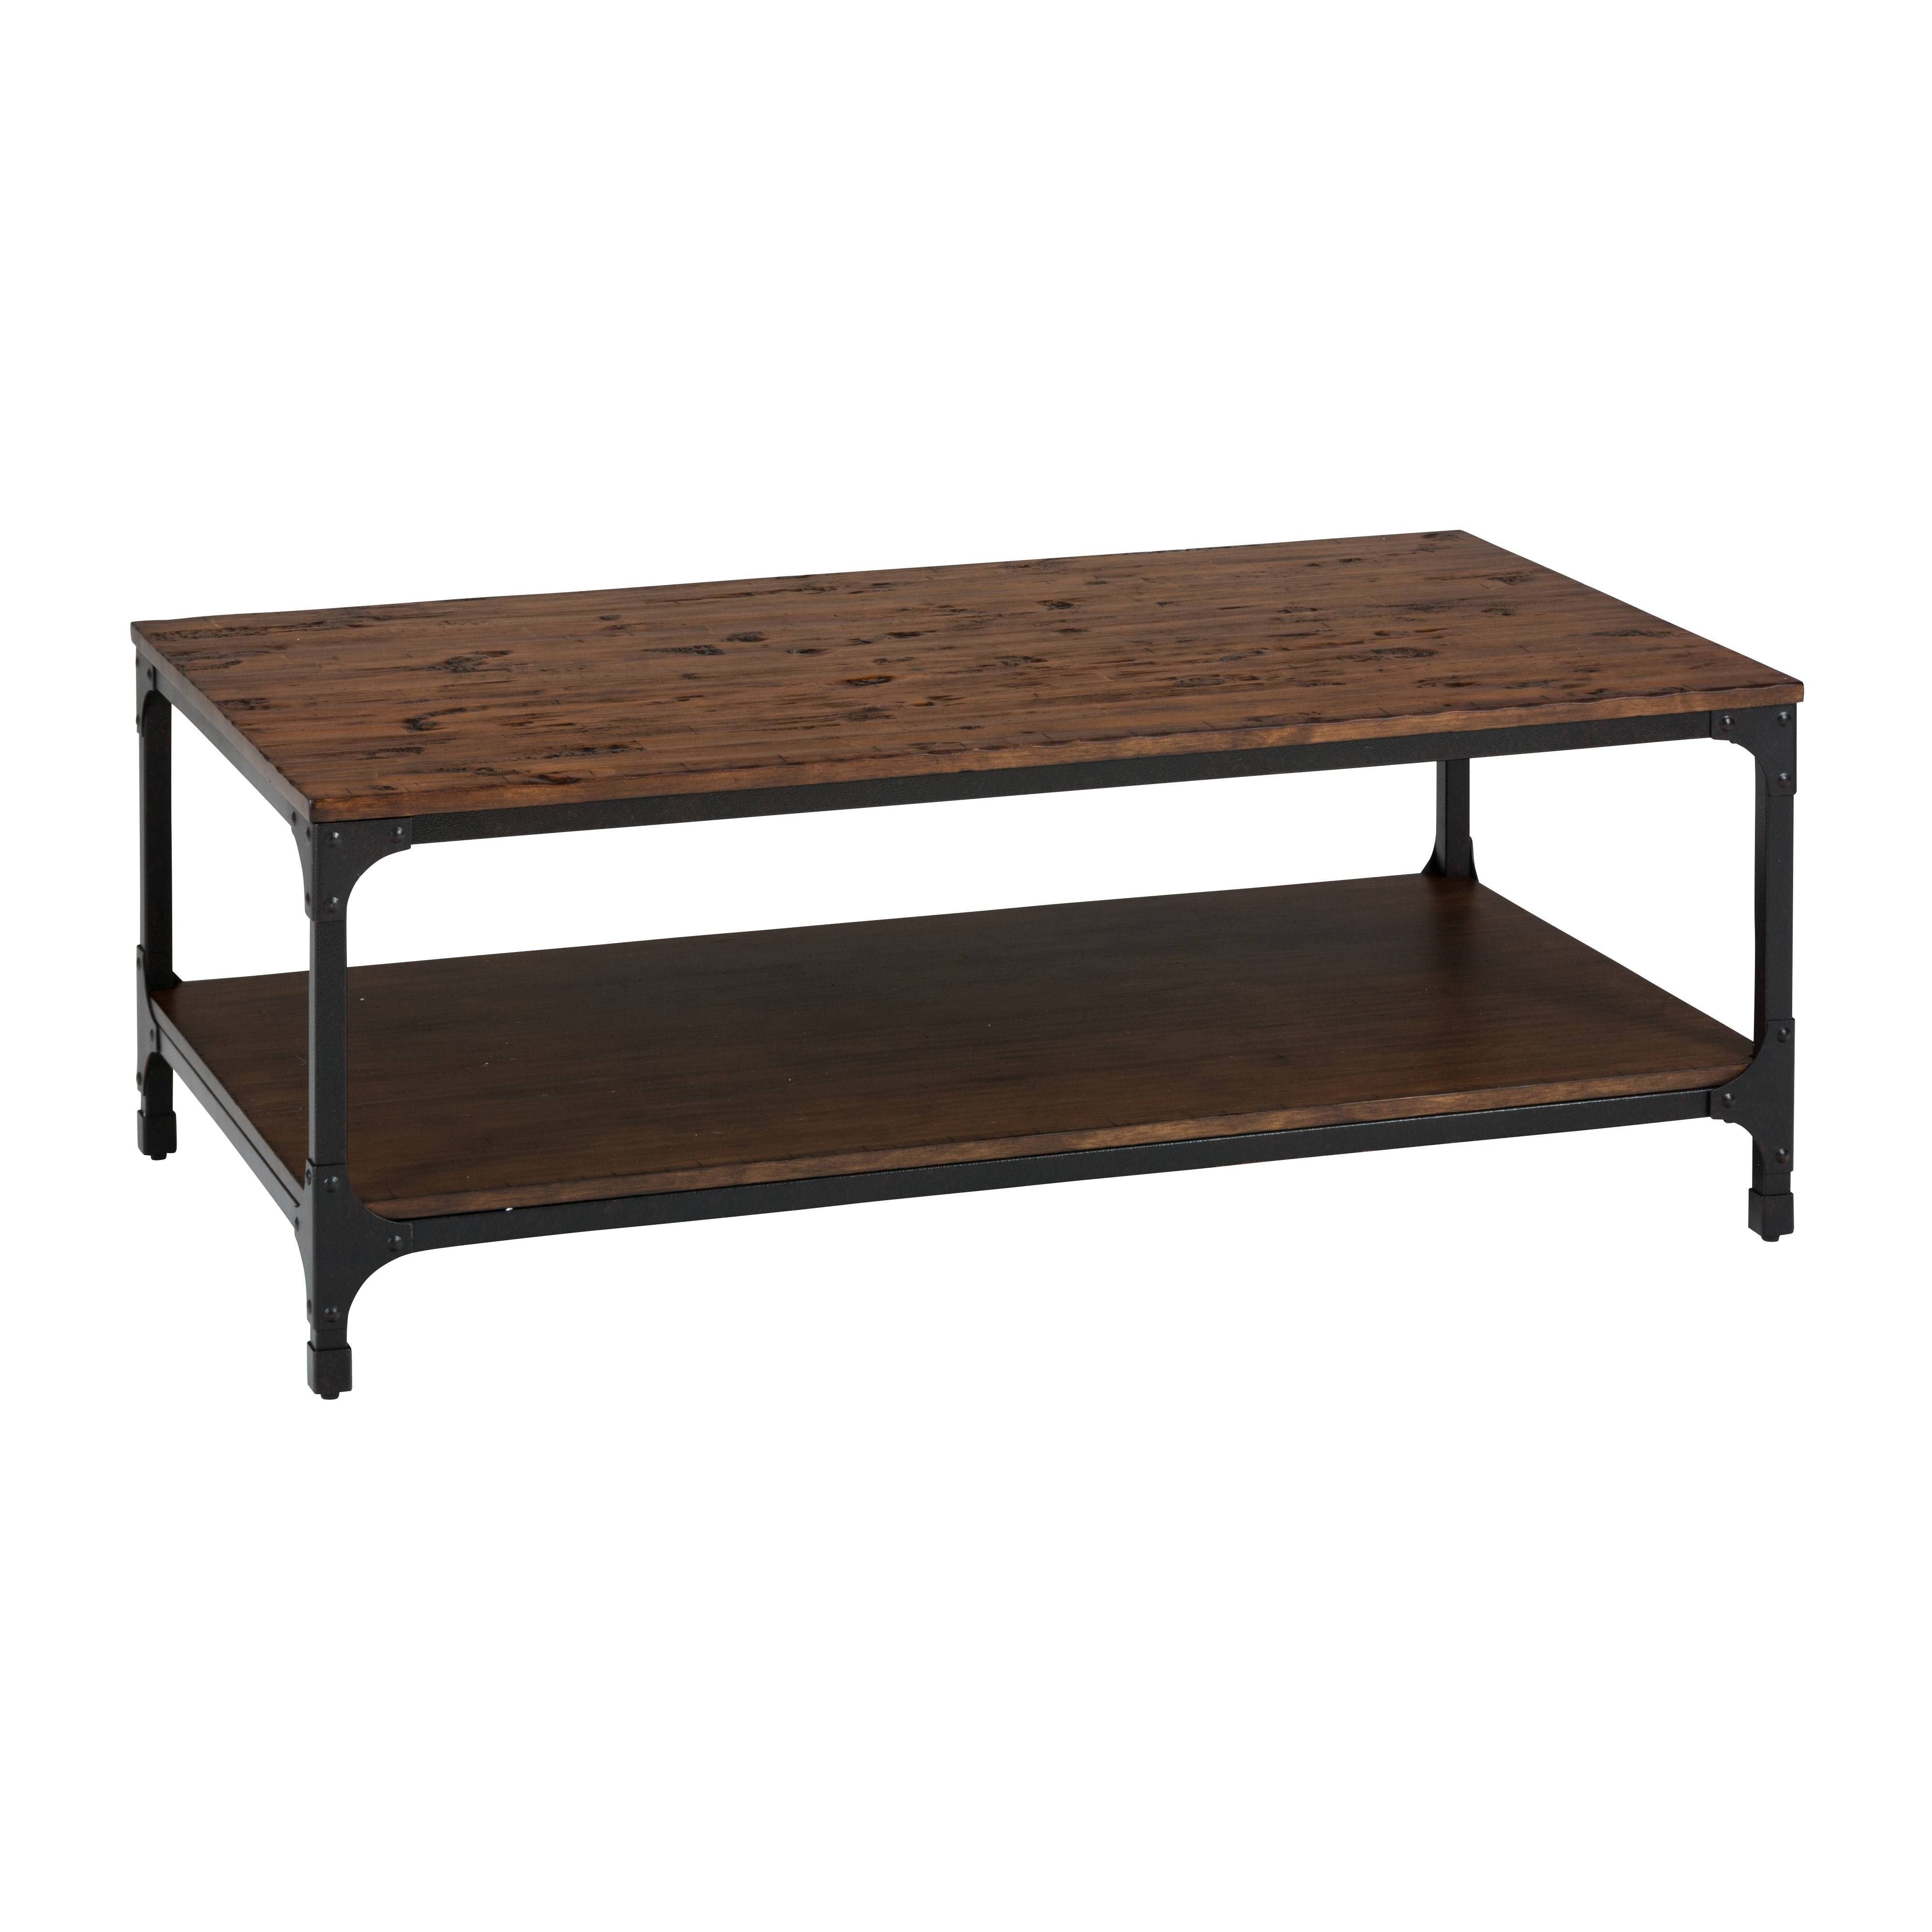 Amish Urban Coffee Table Square With Optional Lift Top Amish Urban Intended For Wayfair Coffee Tables (View 18 of 30)